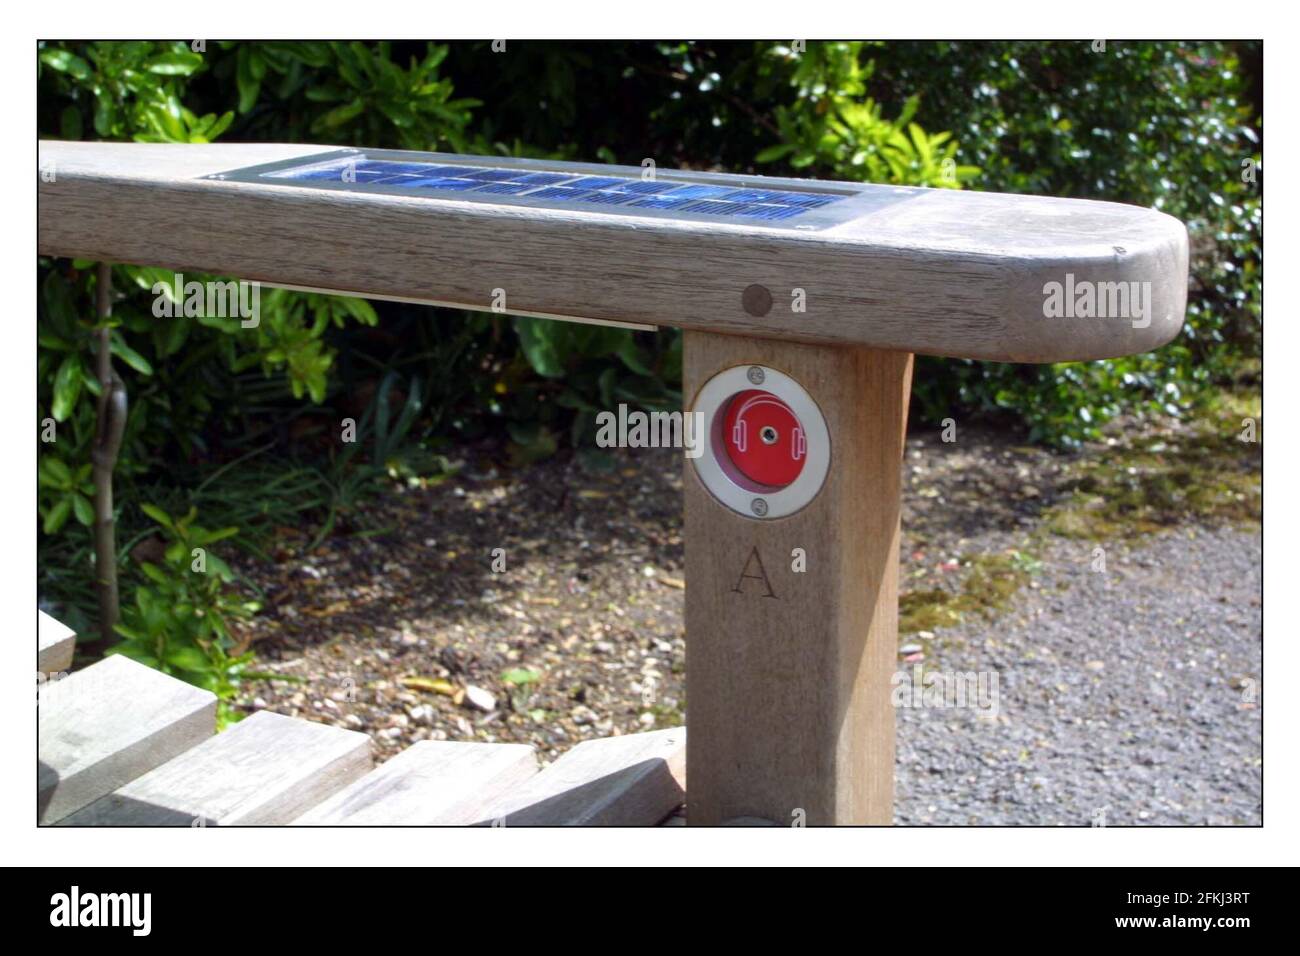 A memorial bench to Ian Dury in poets corner, Pembrook Lodge, Richmond park.The public can listen to the music and interviews of Dury by pluging her headphones into sockets in the arm rests of this special bench with solar panels to power the bench.pic David Sandison 29/4/2002 Stock Photo